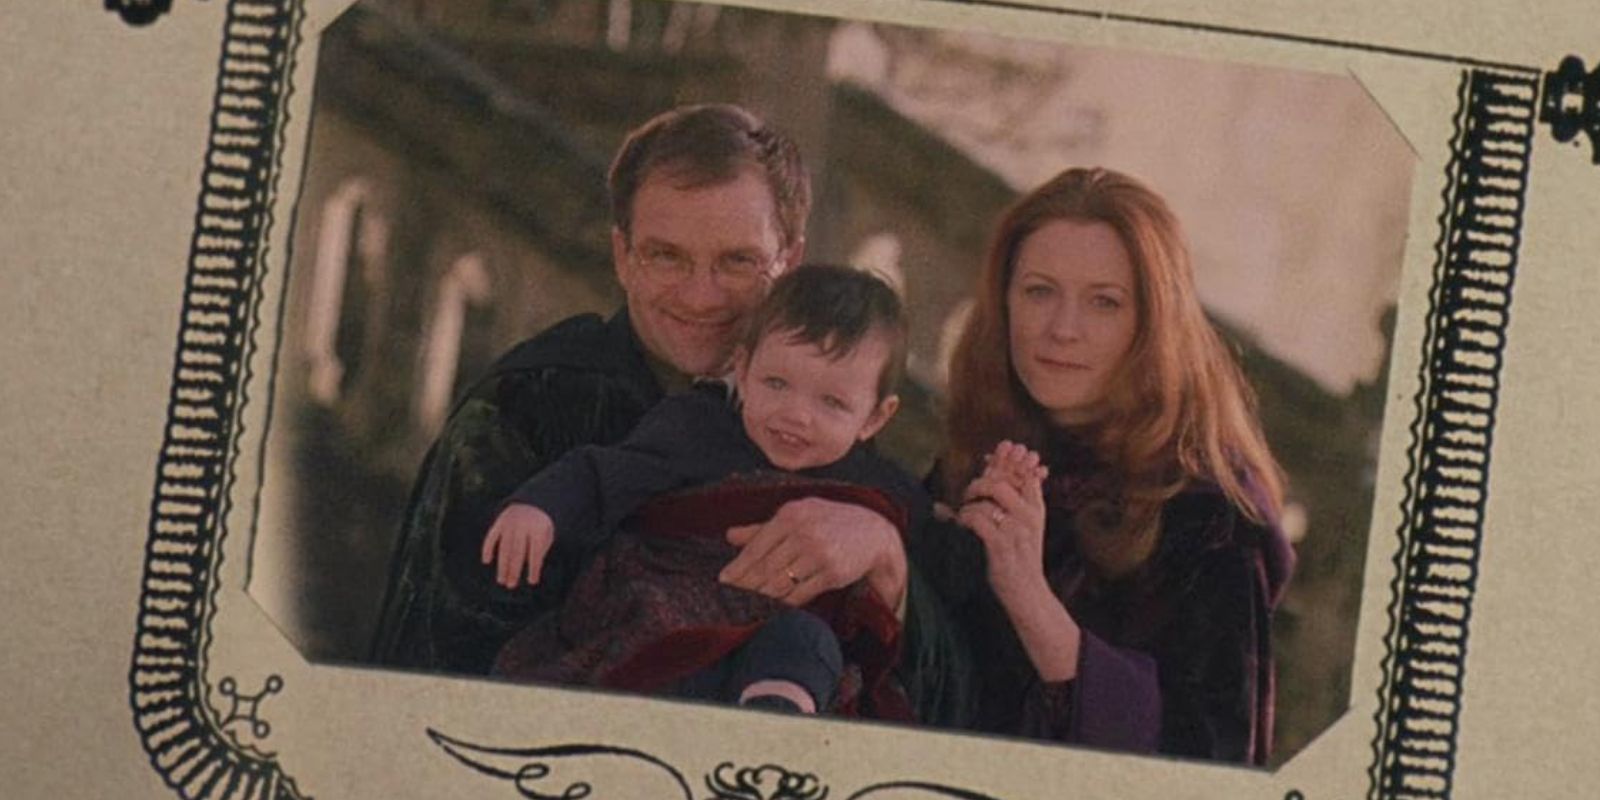 James (Adrian Rawlins) holds baby Harry (Saunders Triplets) beside Lily (Geraldine Somerville) in a photo album in 'Harry Potter and the Sorcerer's Stone'